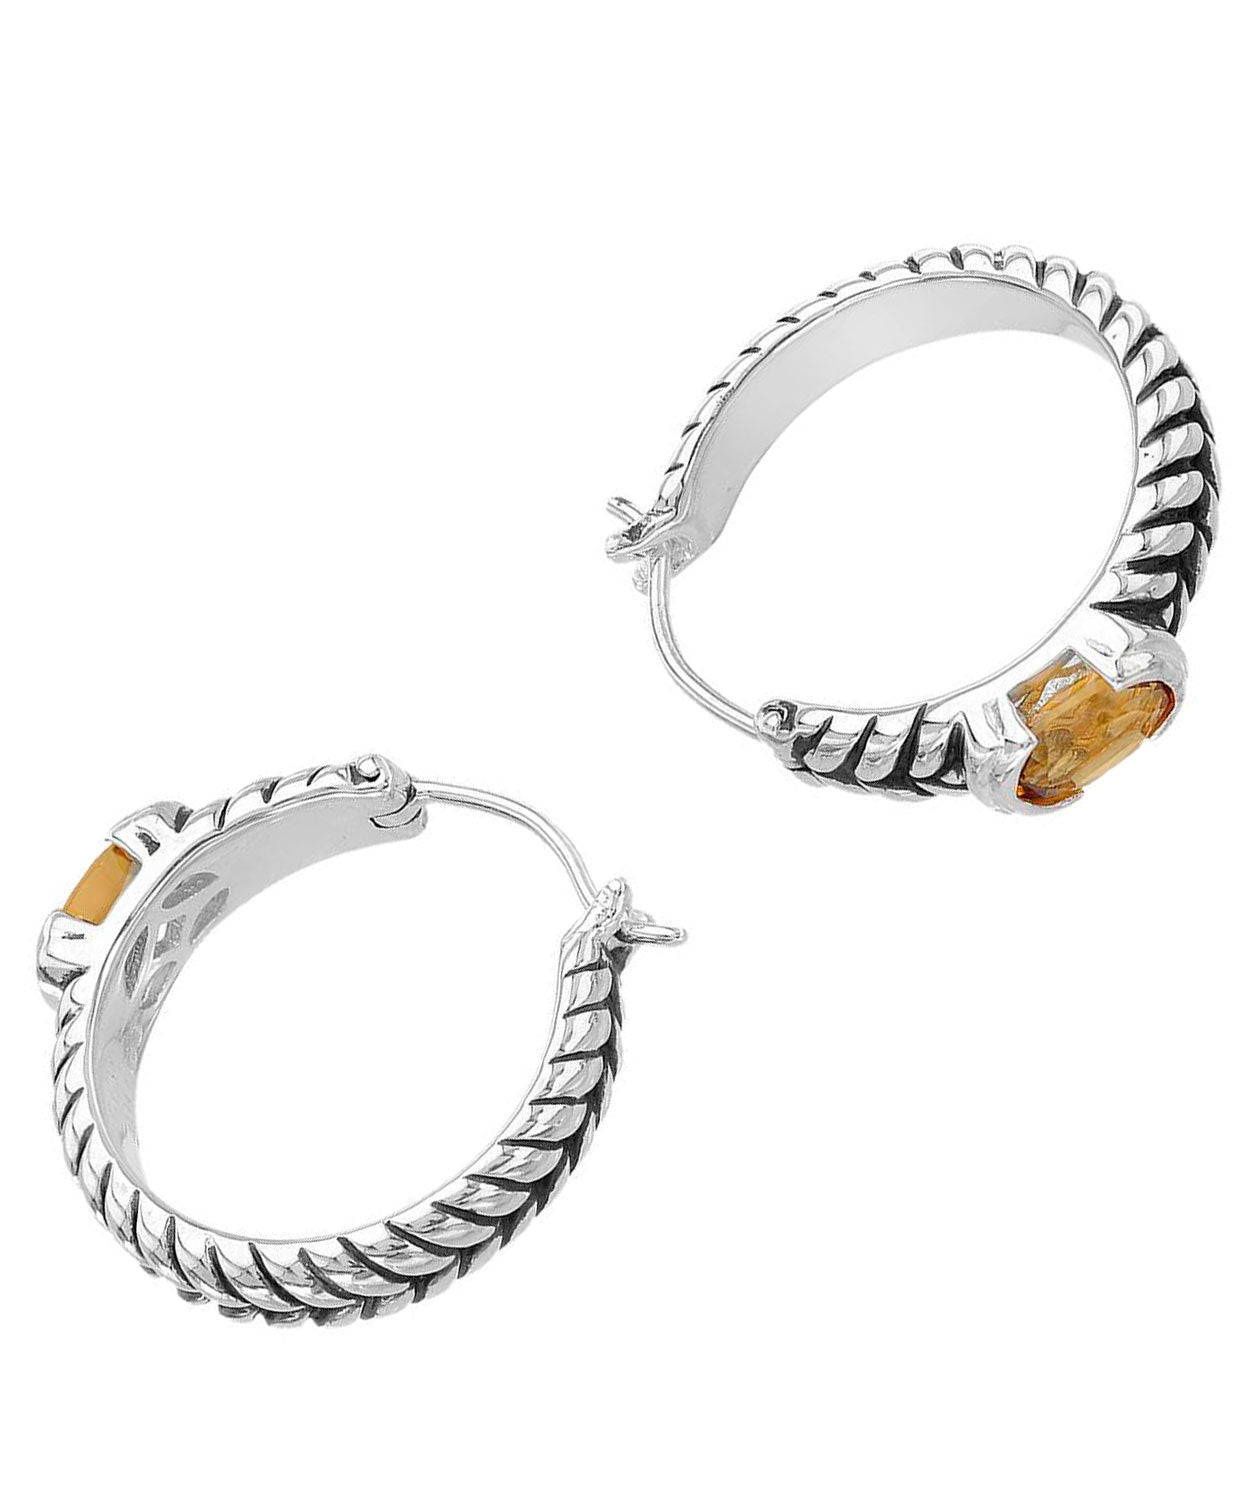 Colore by Simon Golub 1.00 ctw Natural Honey Citrine 925 Sterling Silver Hoop Earrings View 2